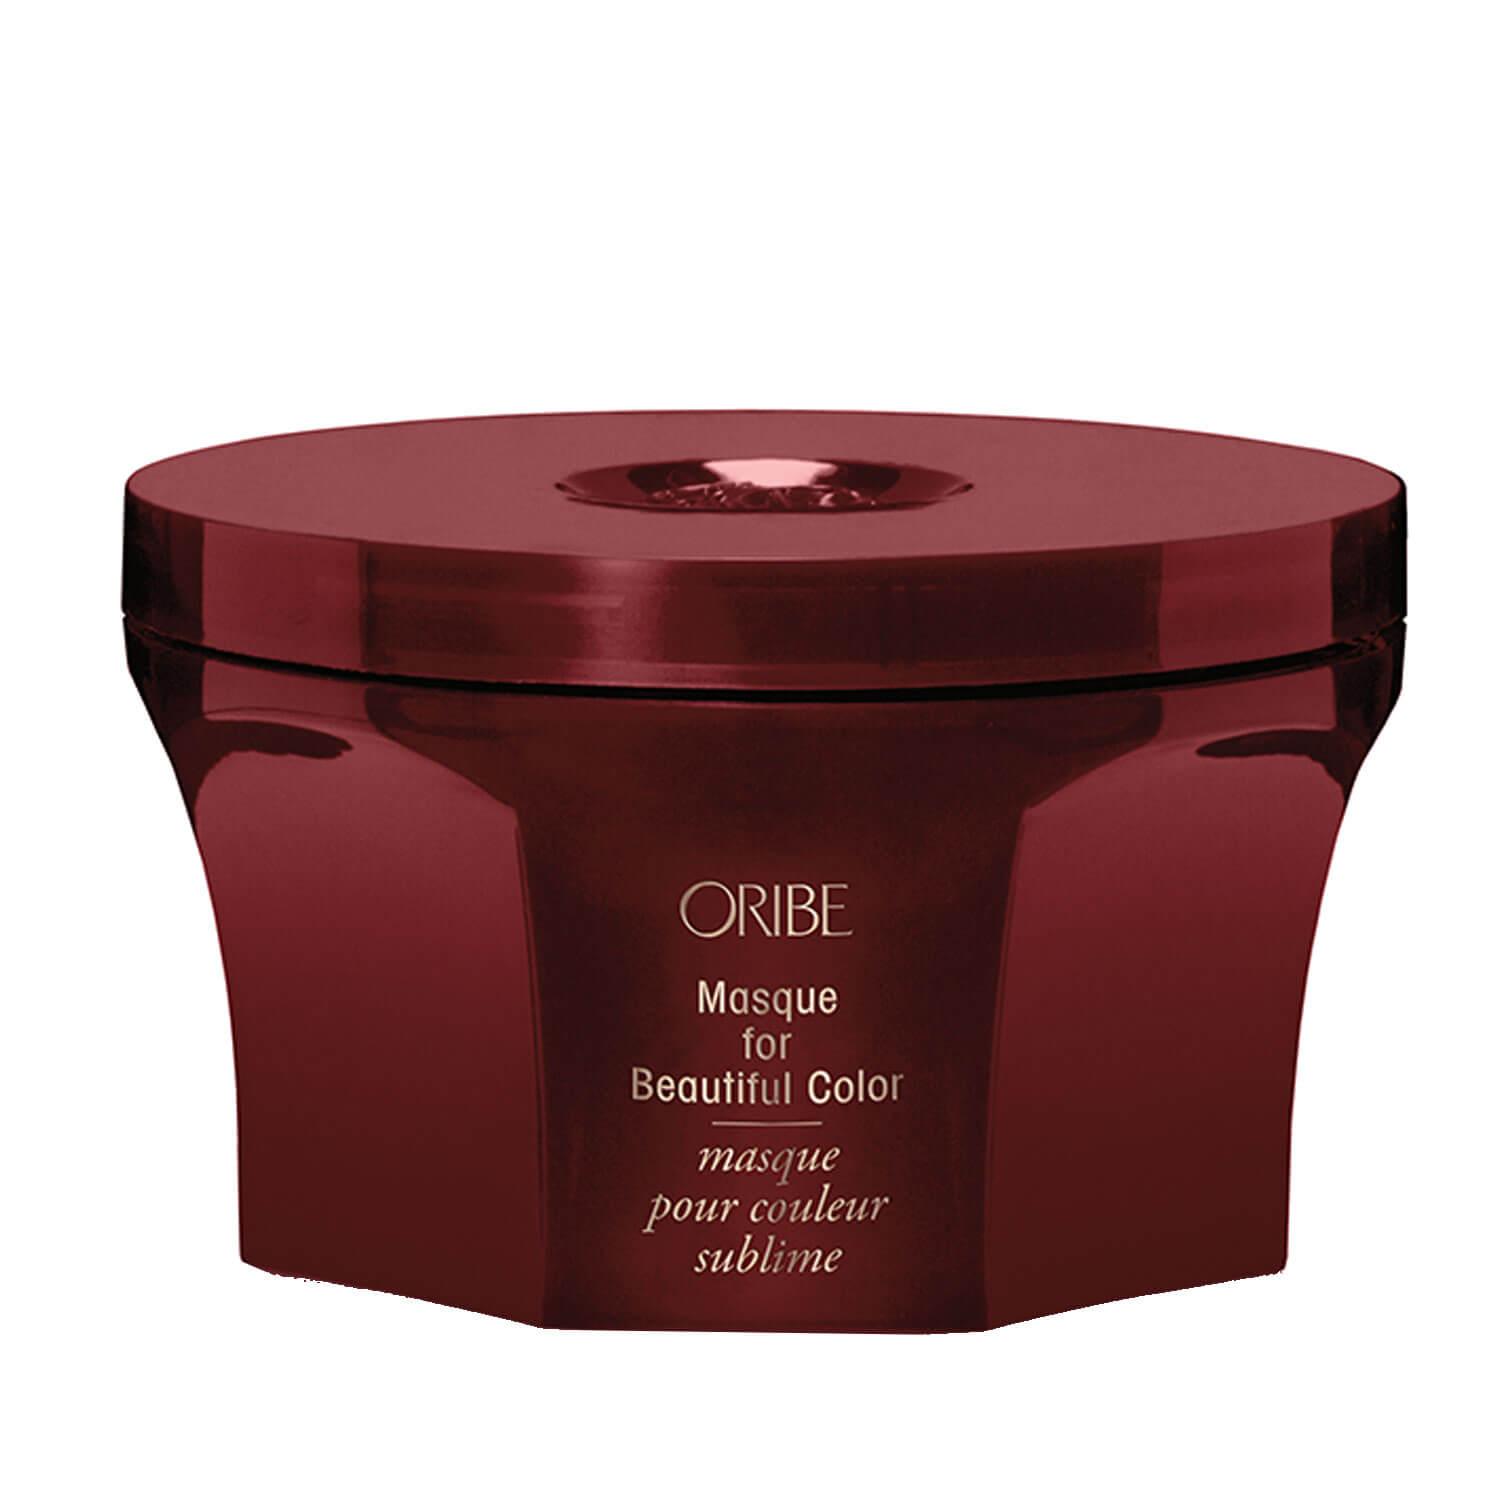 Oribe Care - Masque for Beautiful Color